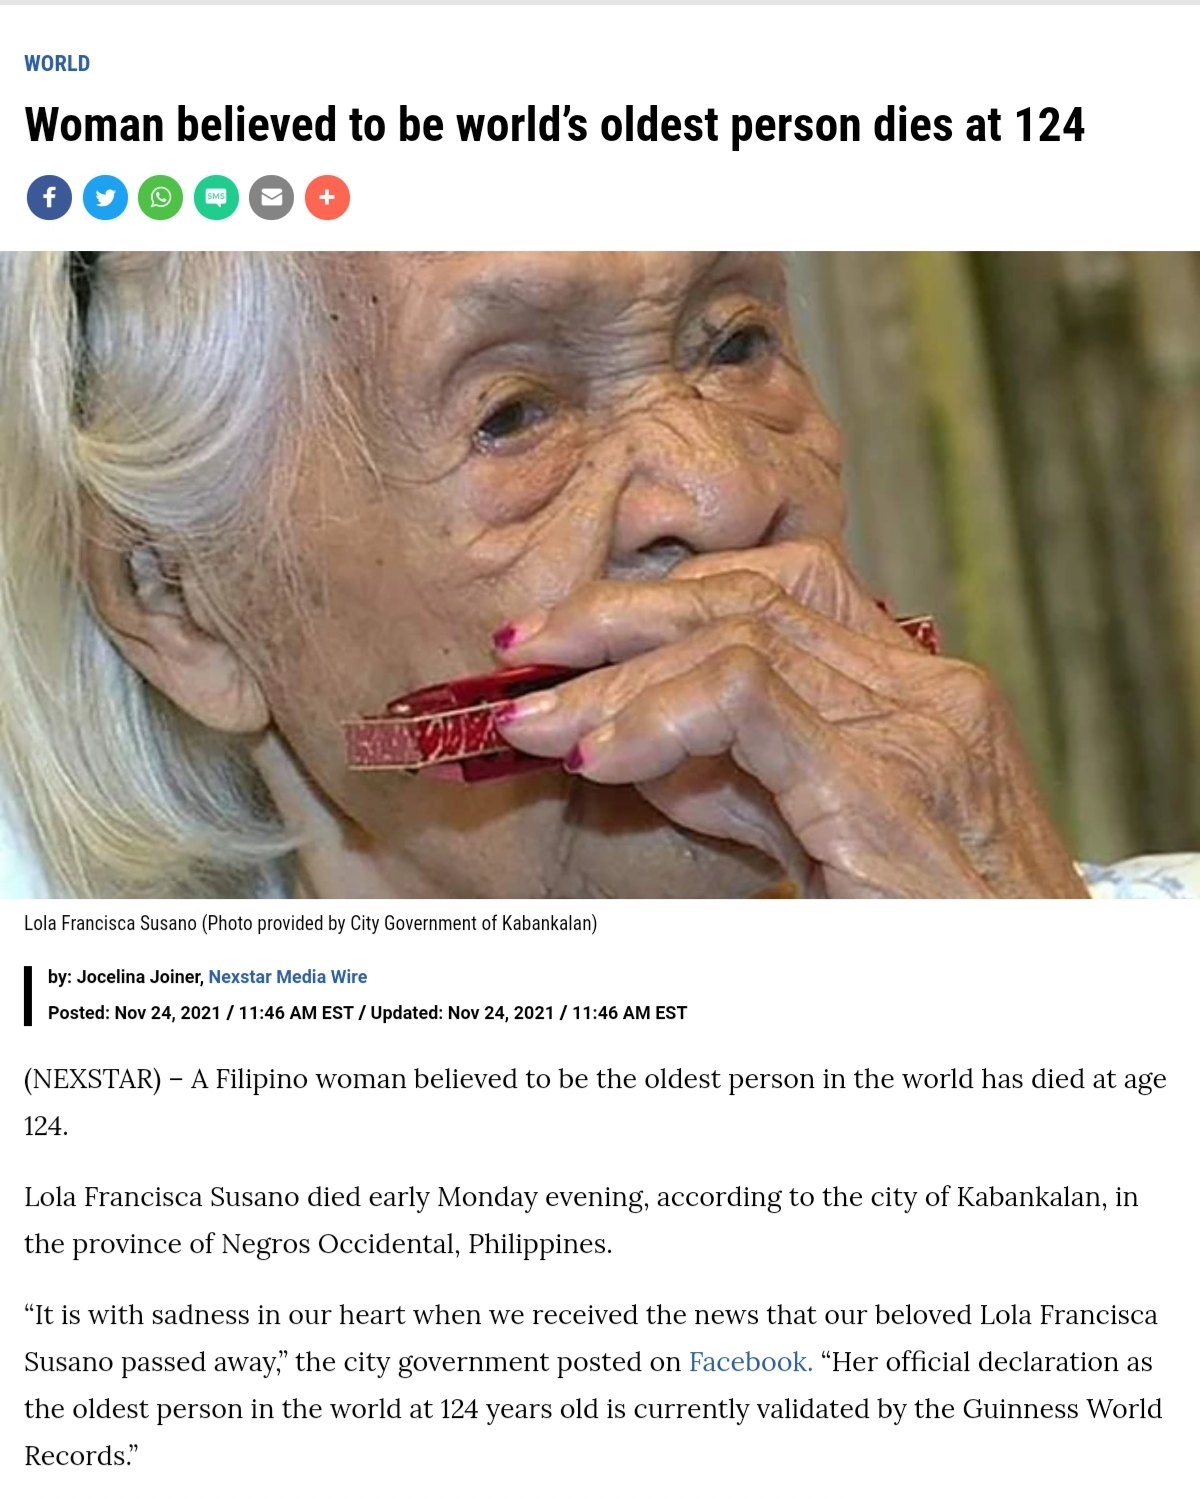 Girl believed to be world’s oldest particular person dies at 124